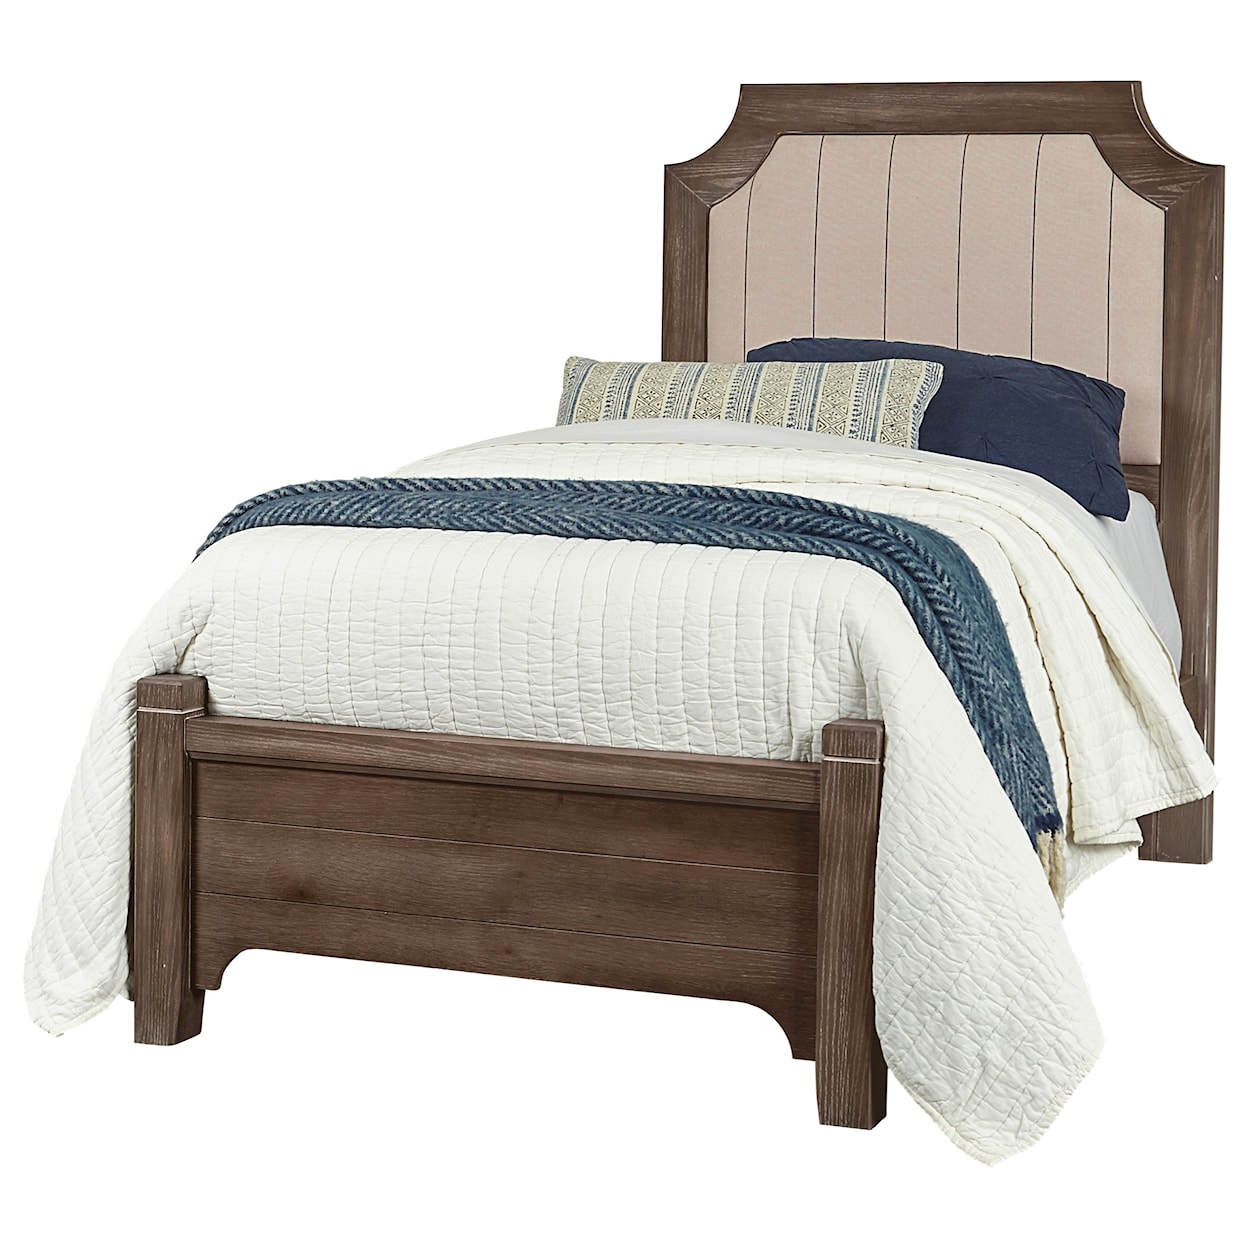 Laurel Mercantile Co. Bungalow Full Upholstered Bed